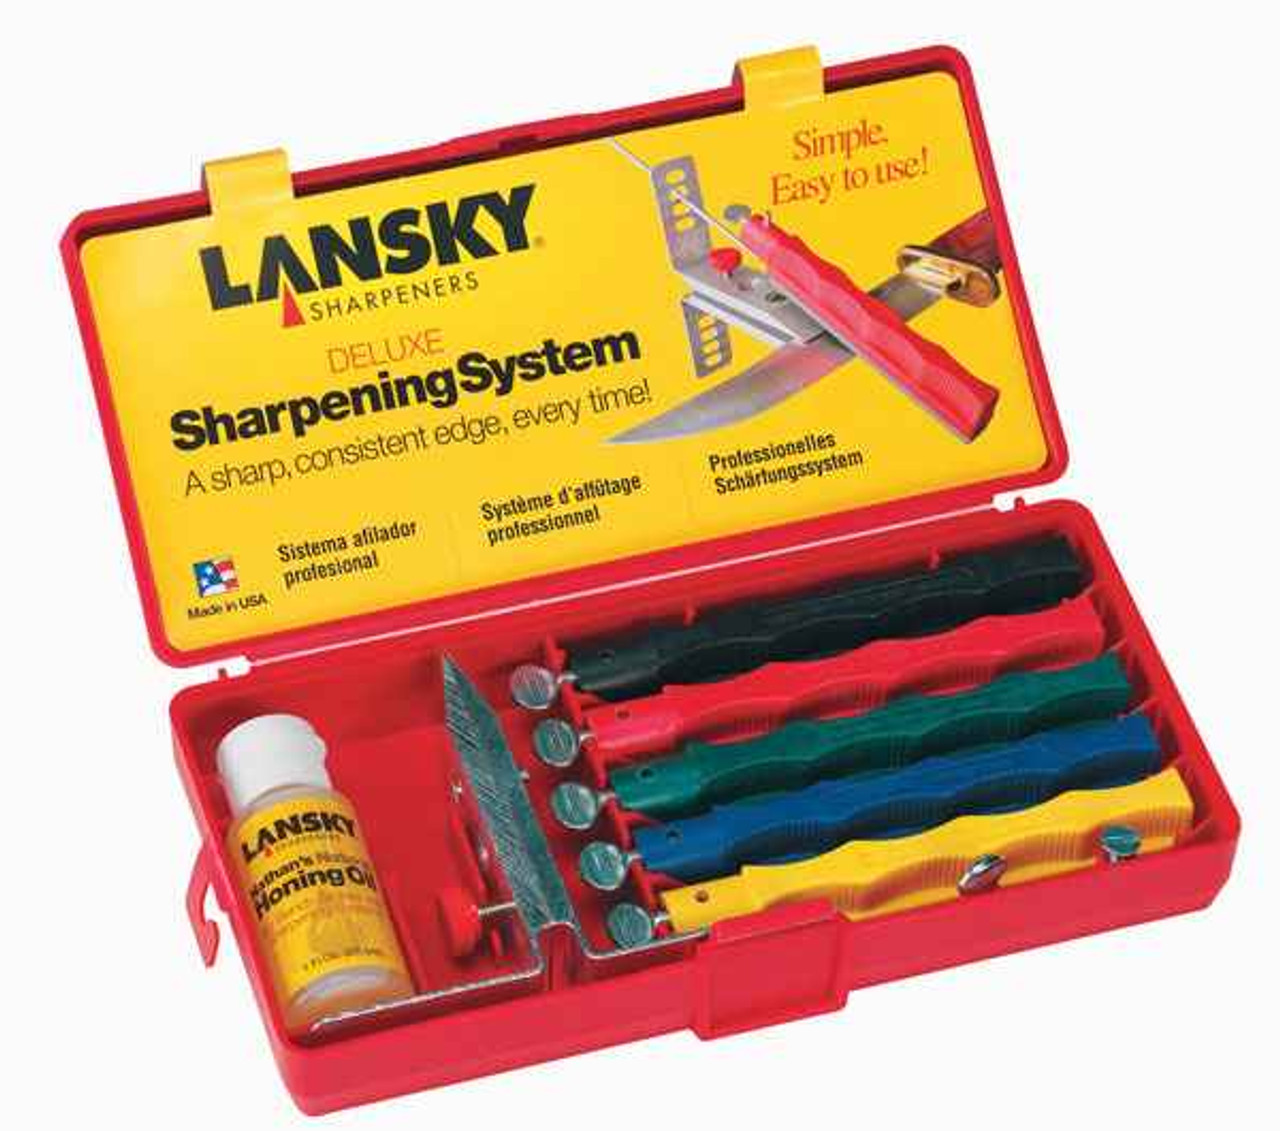 How to sharpen a Knife Using the Lansky Sharpening System 